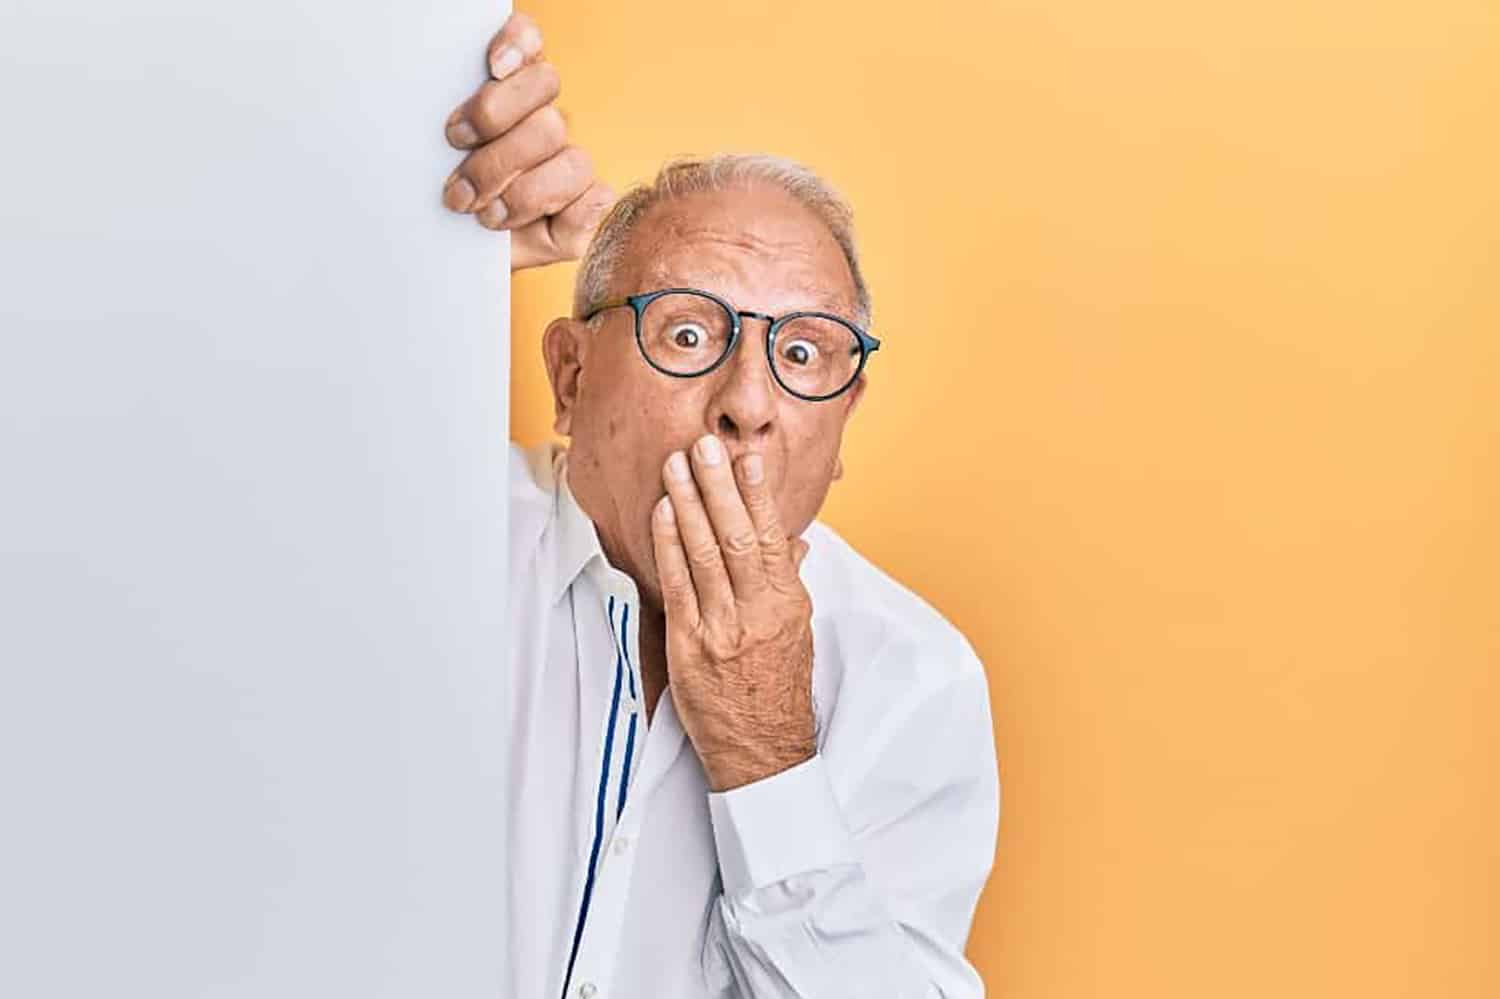 A man behind a white wall with hand over his mouth in surprise.